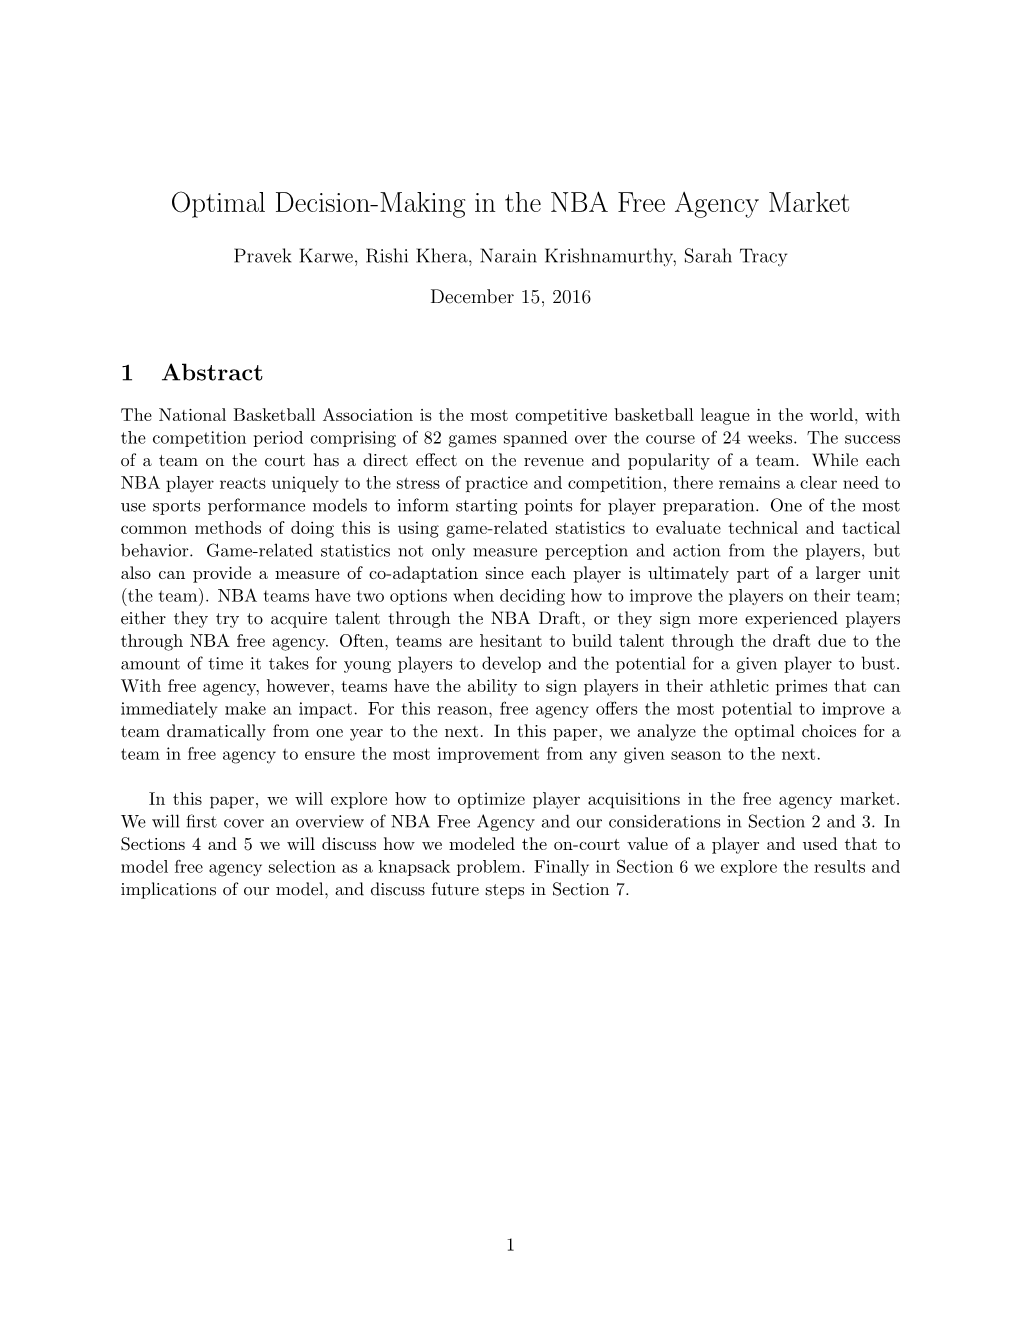 Optimal Decision-Making in the NBA Free Agency Market